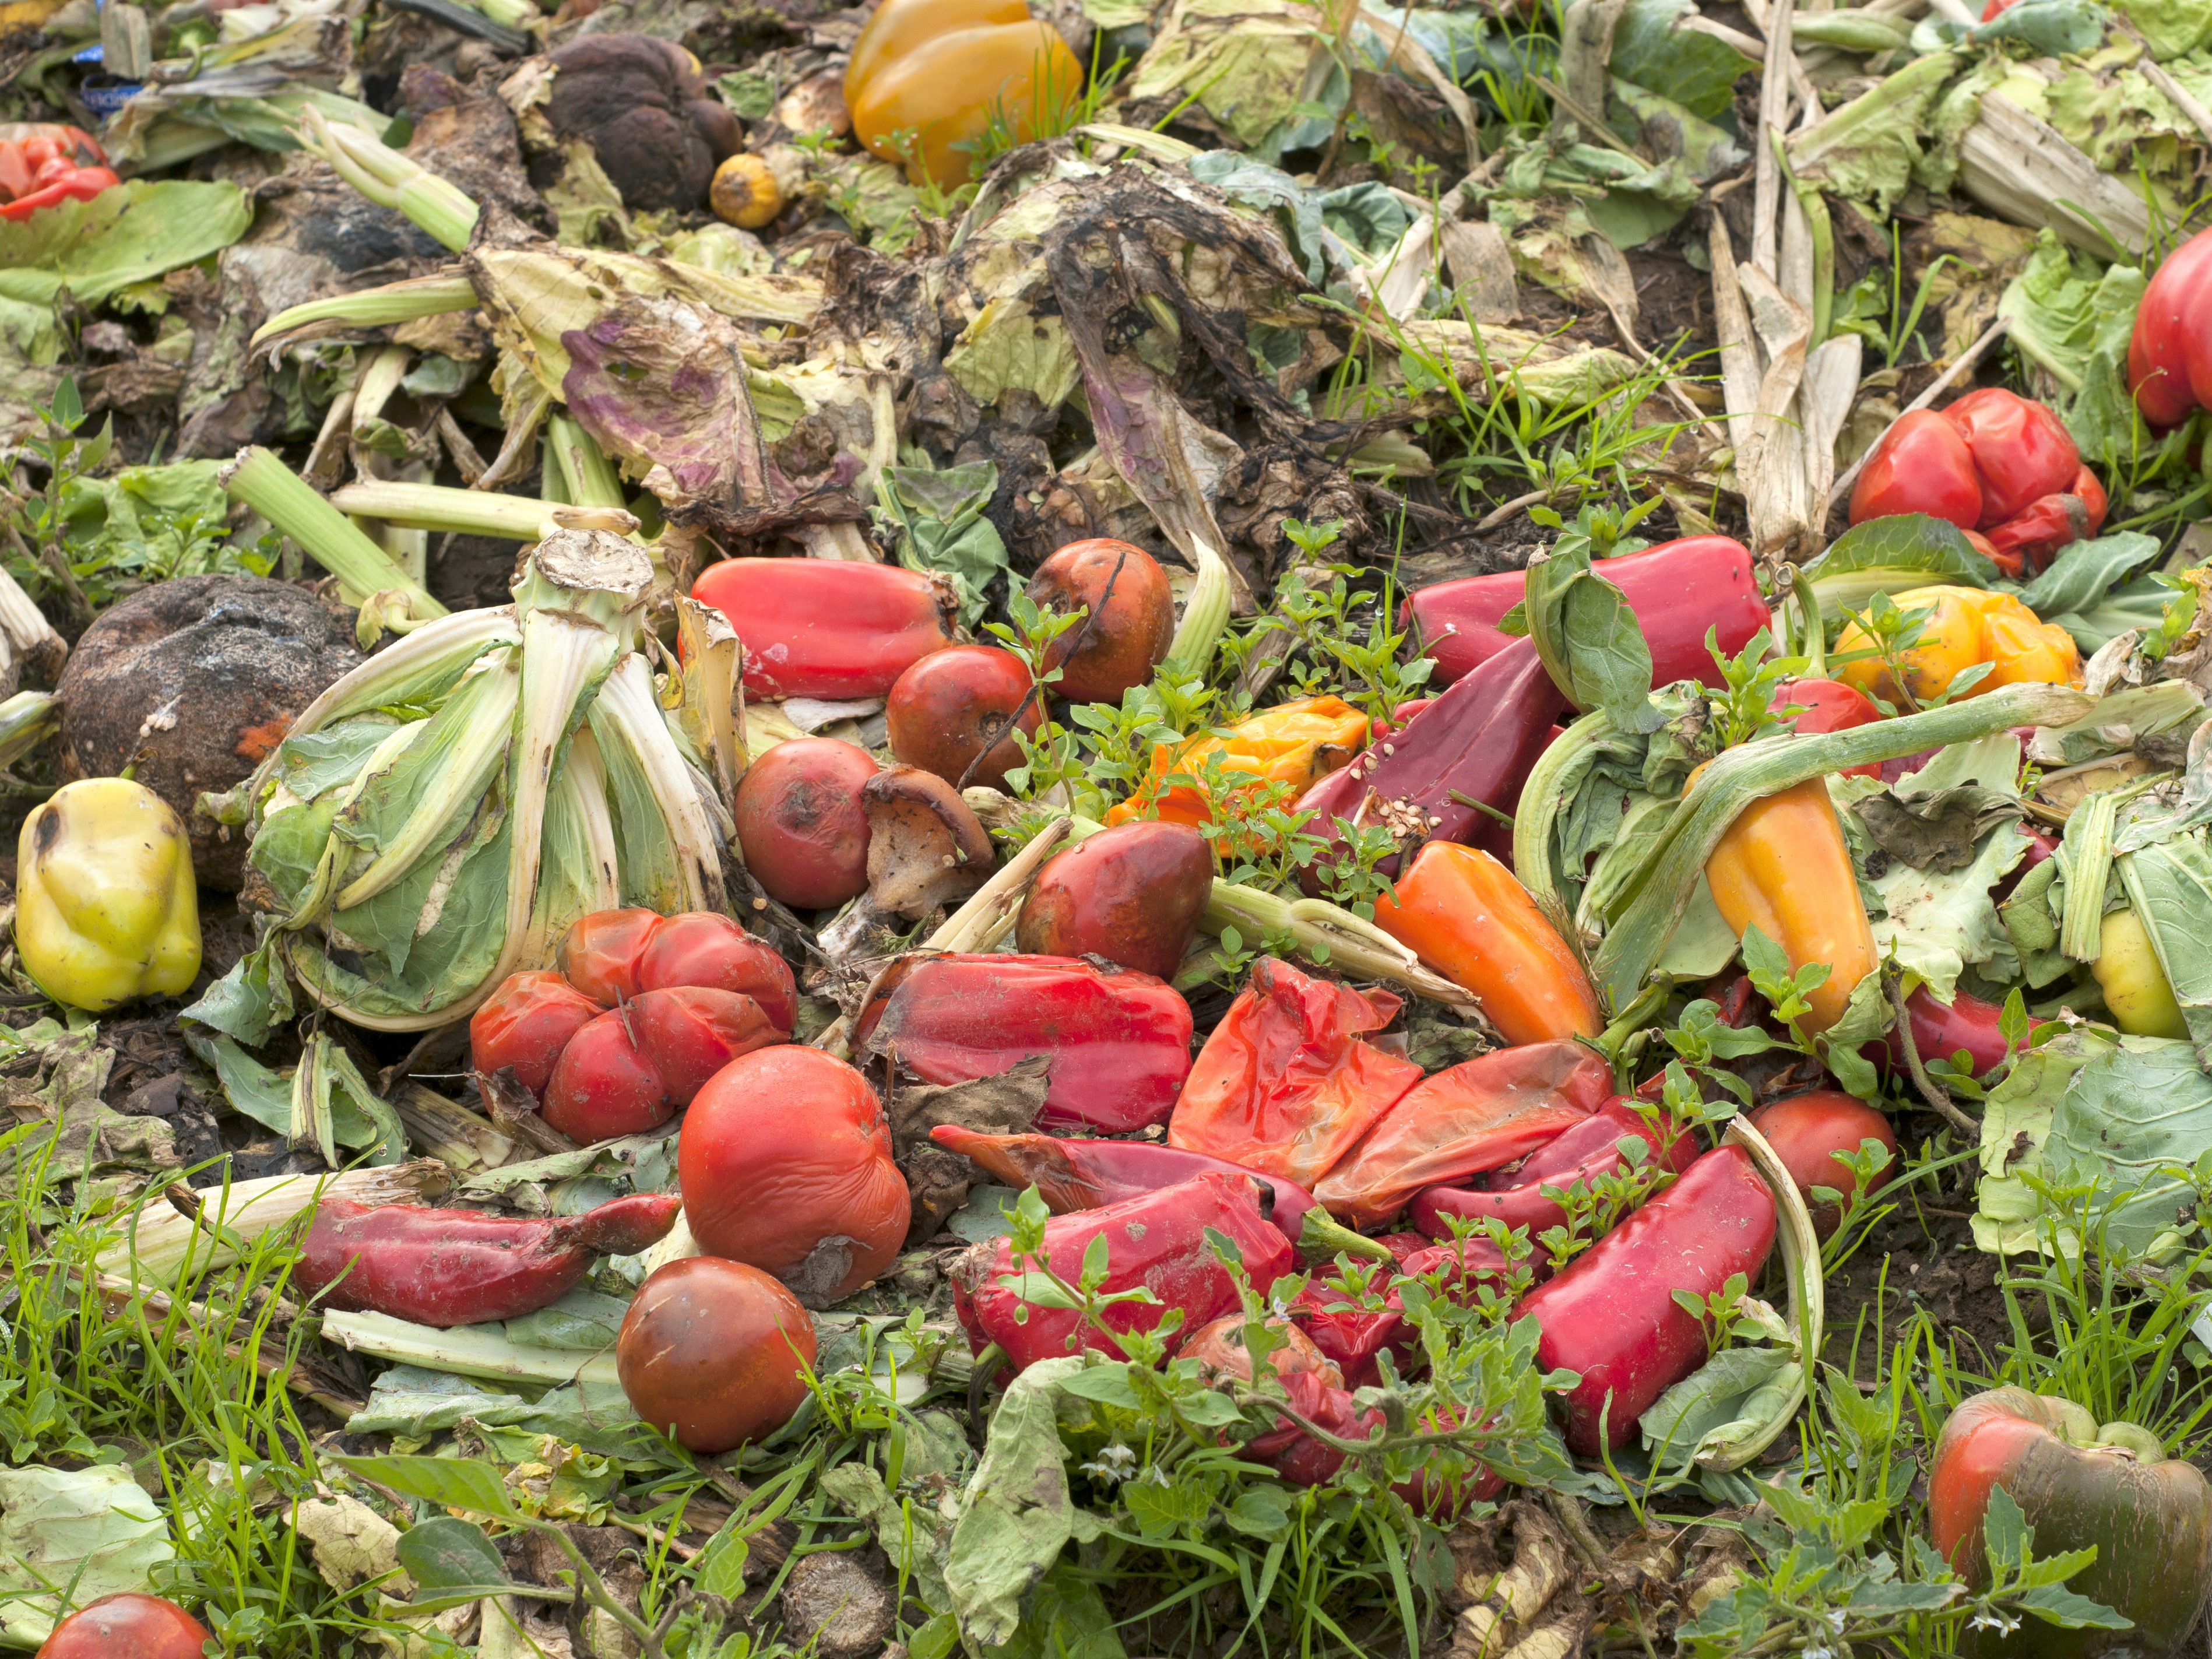 National Food Waste Strategy Feasibility Study launch and Food Waste webinar